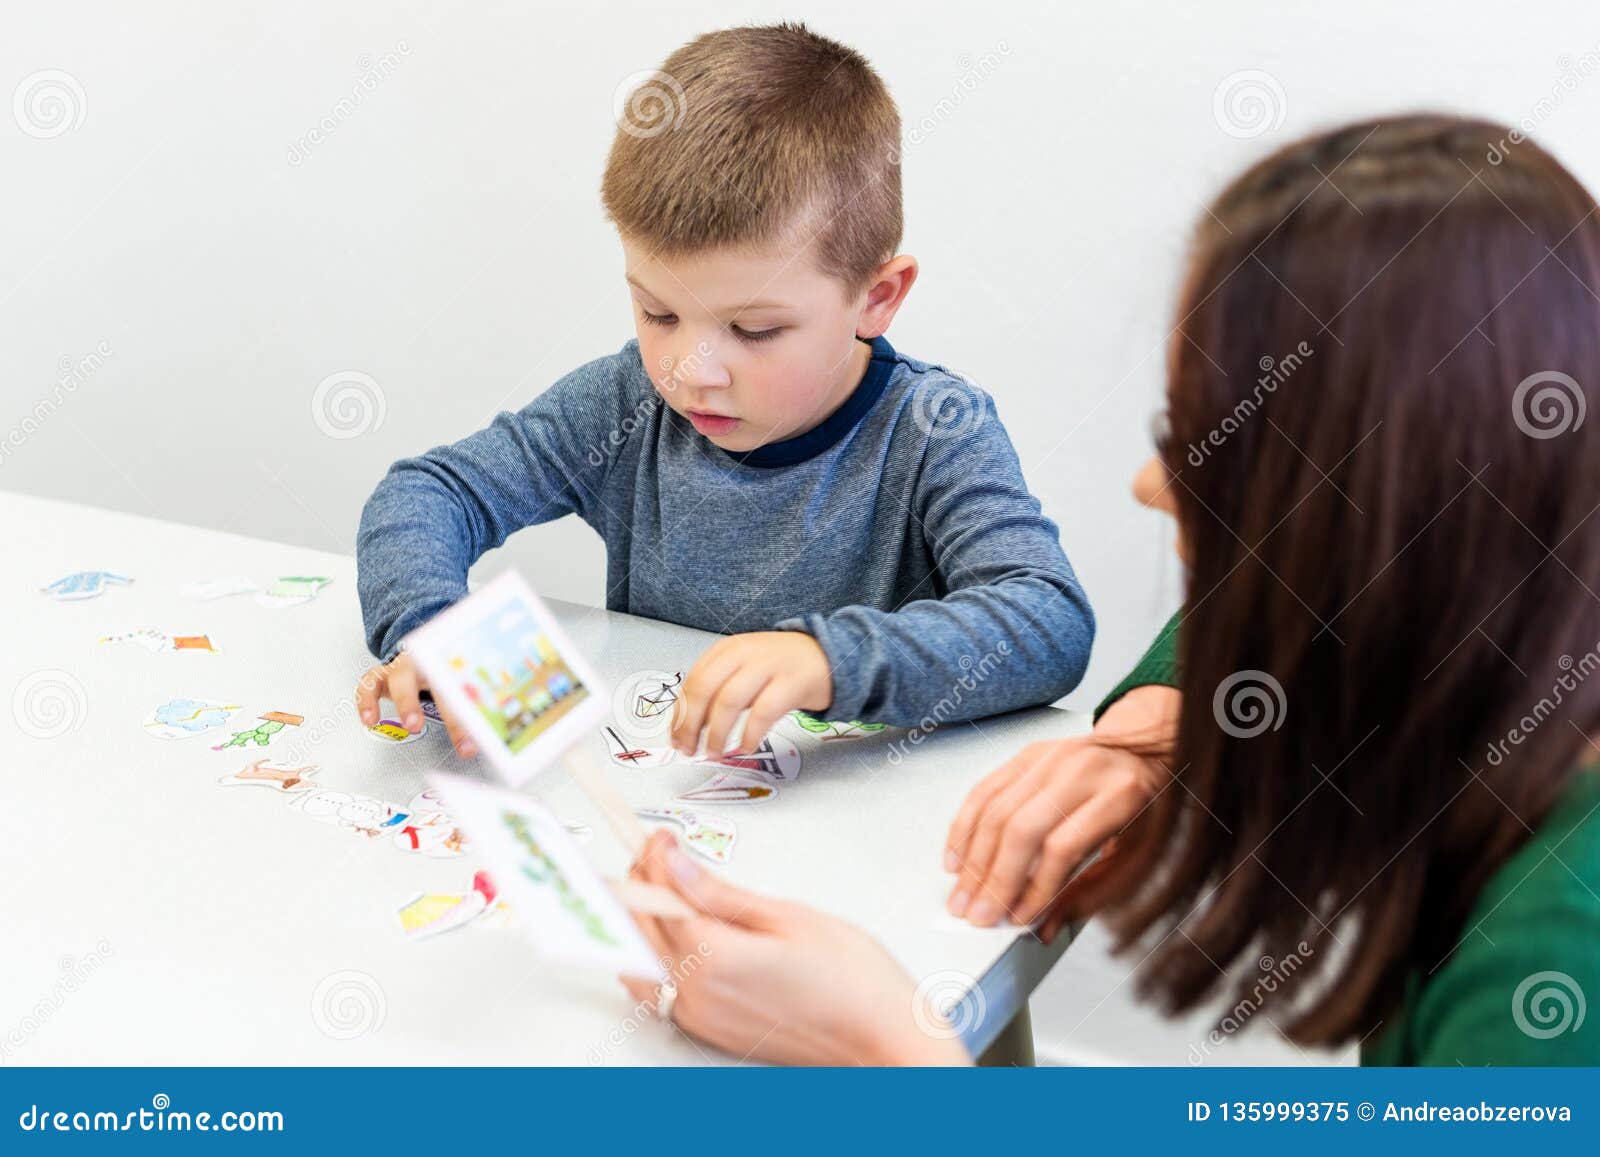 young boy in speech therapy office. preschooler exercising correct pronunciation with speech therapist. child occupational therapy